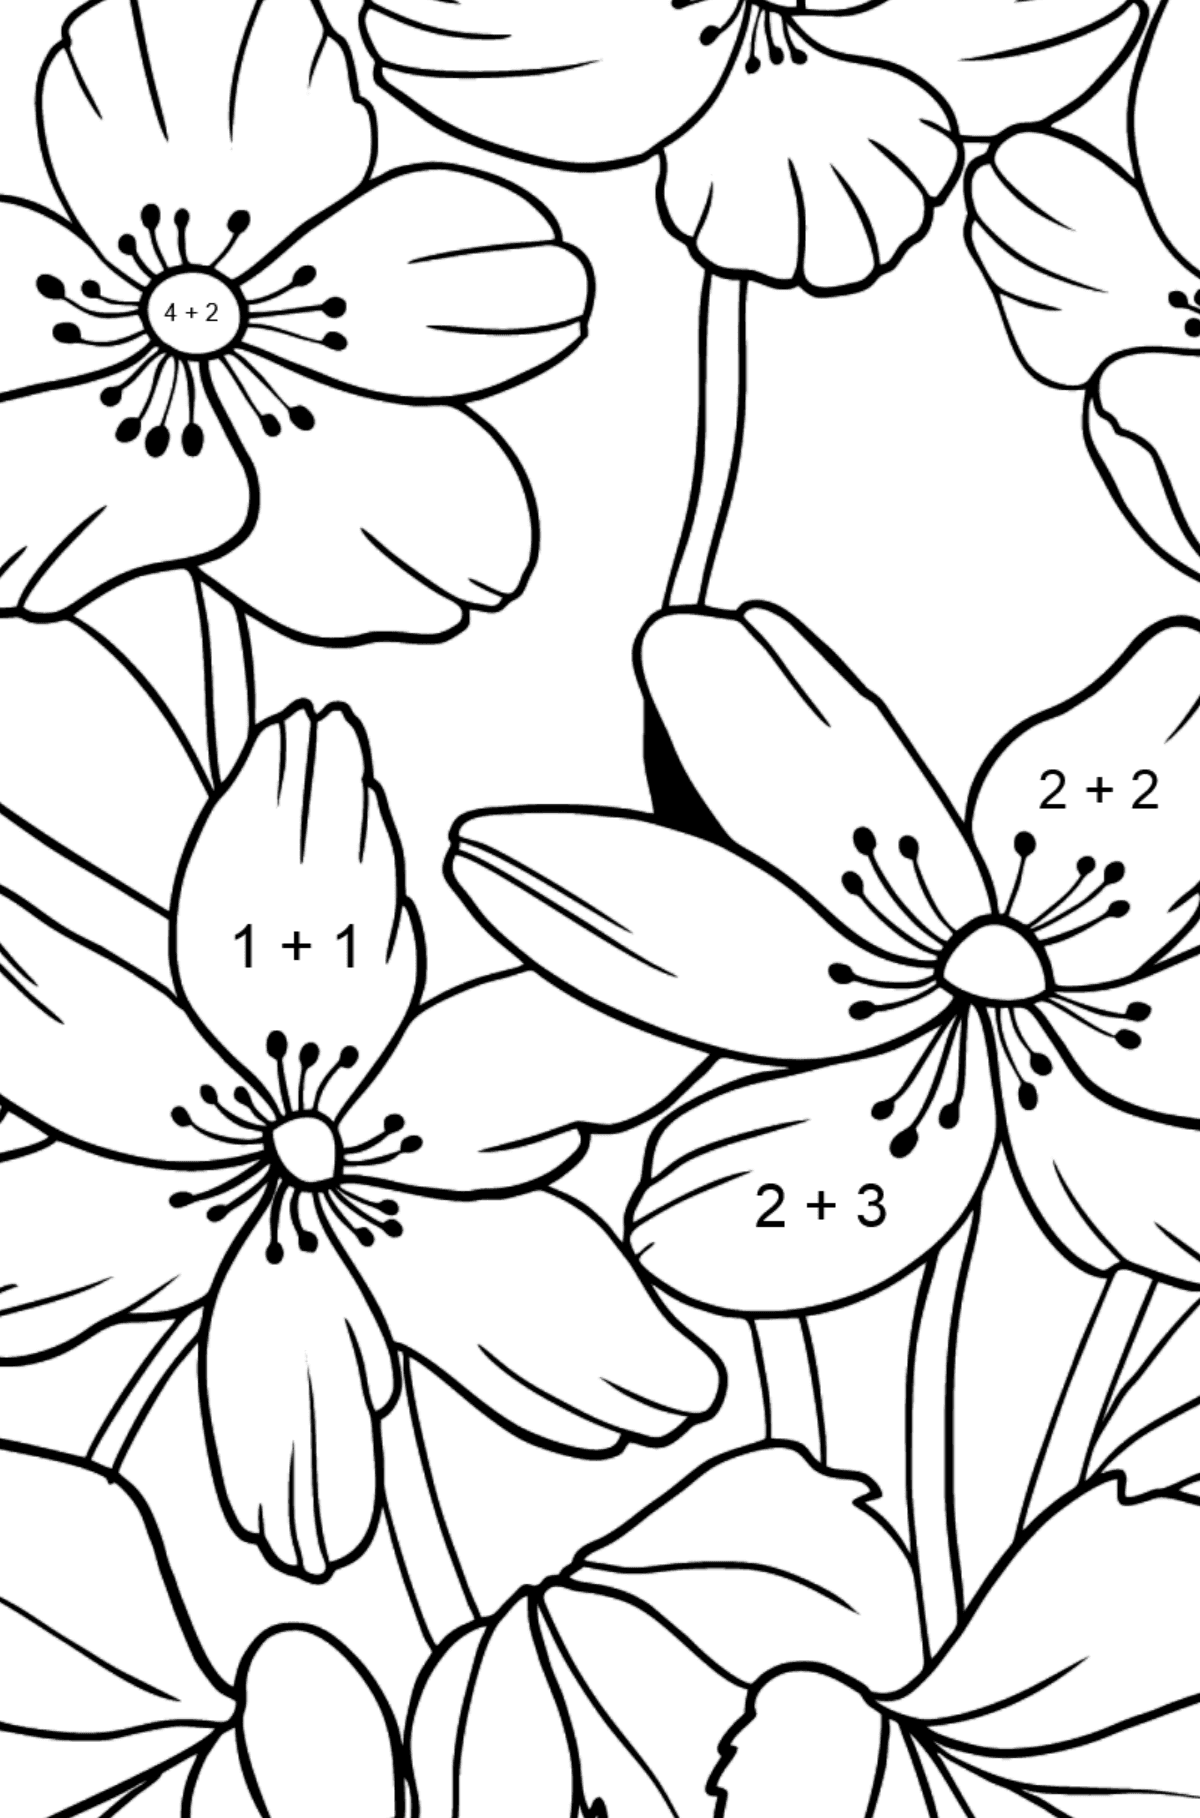 Flower Coloring Page - A Pastel Yellow Windflower - Math Coloring - Addition for Kids